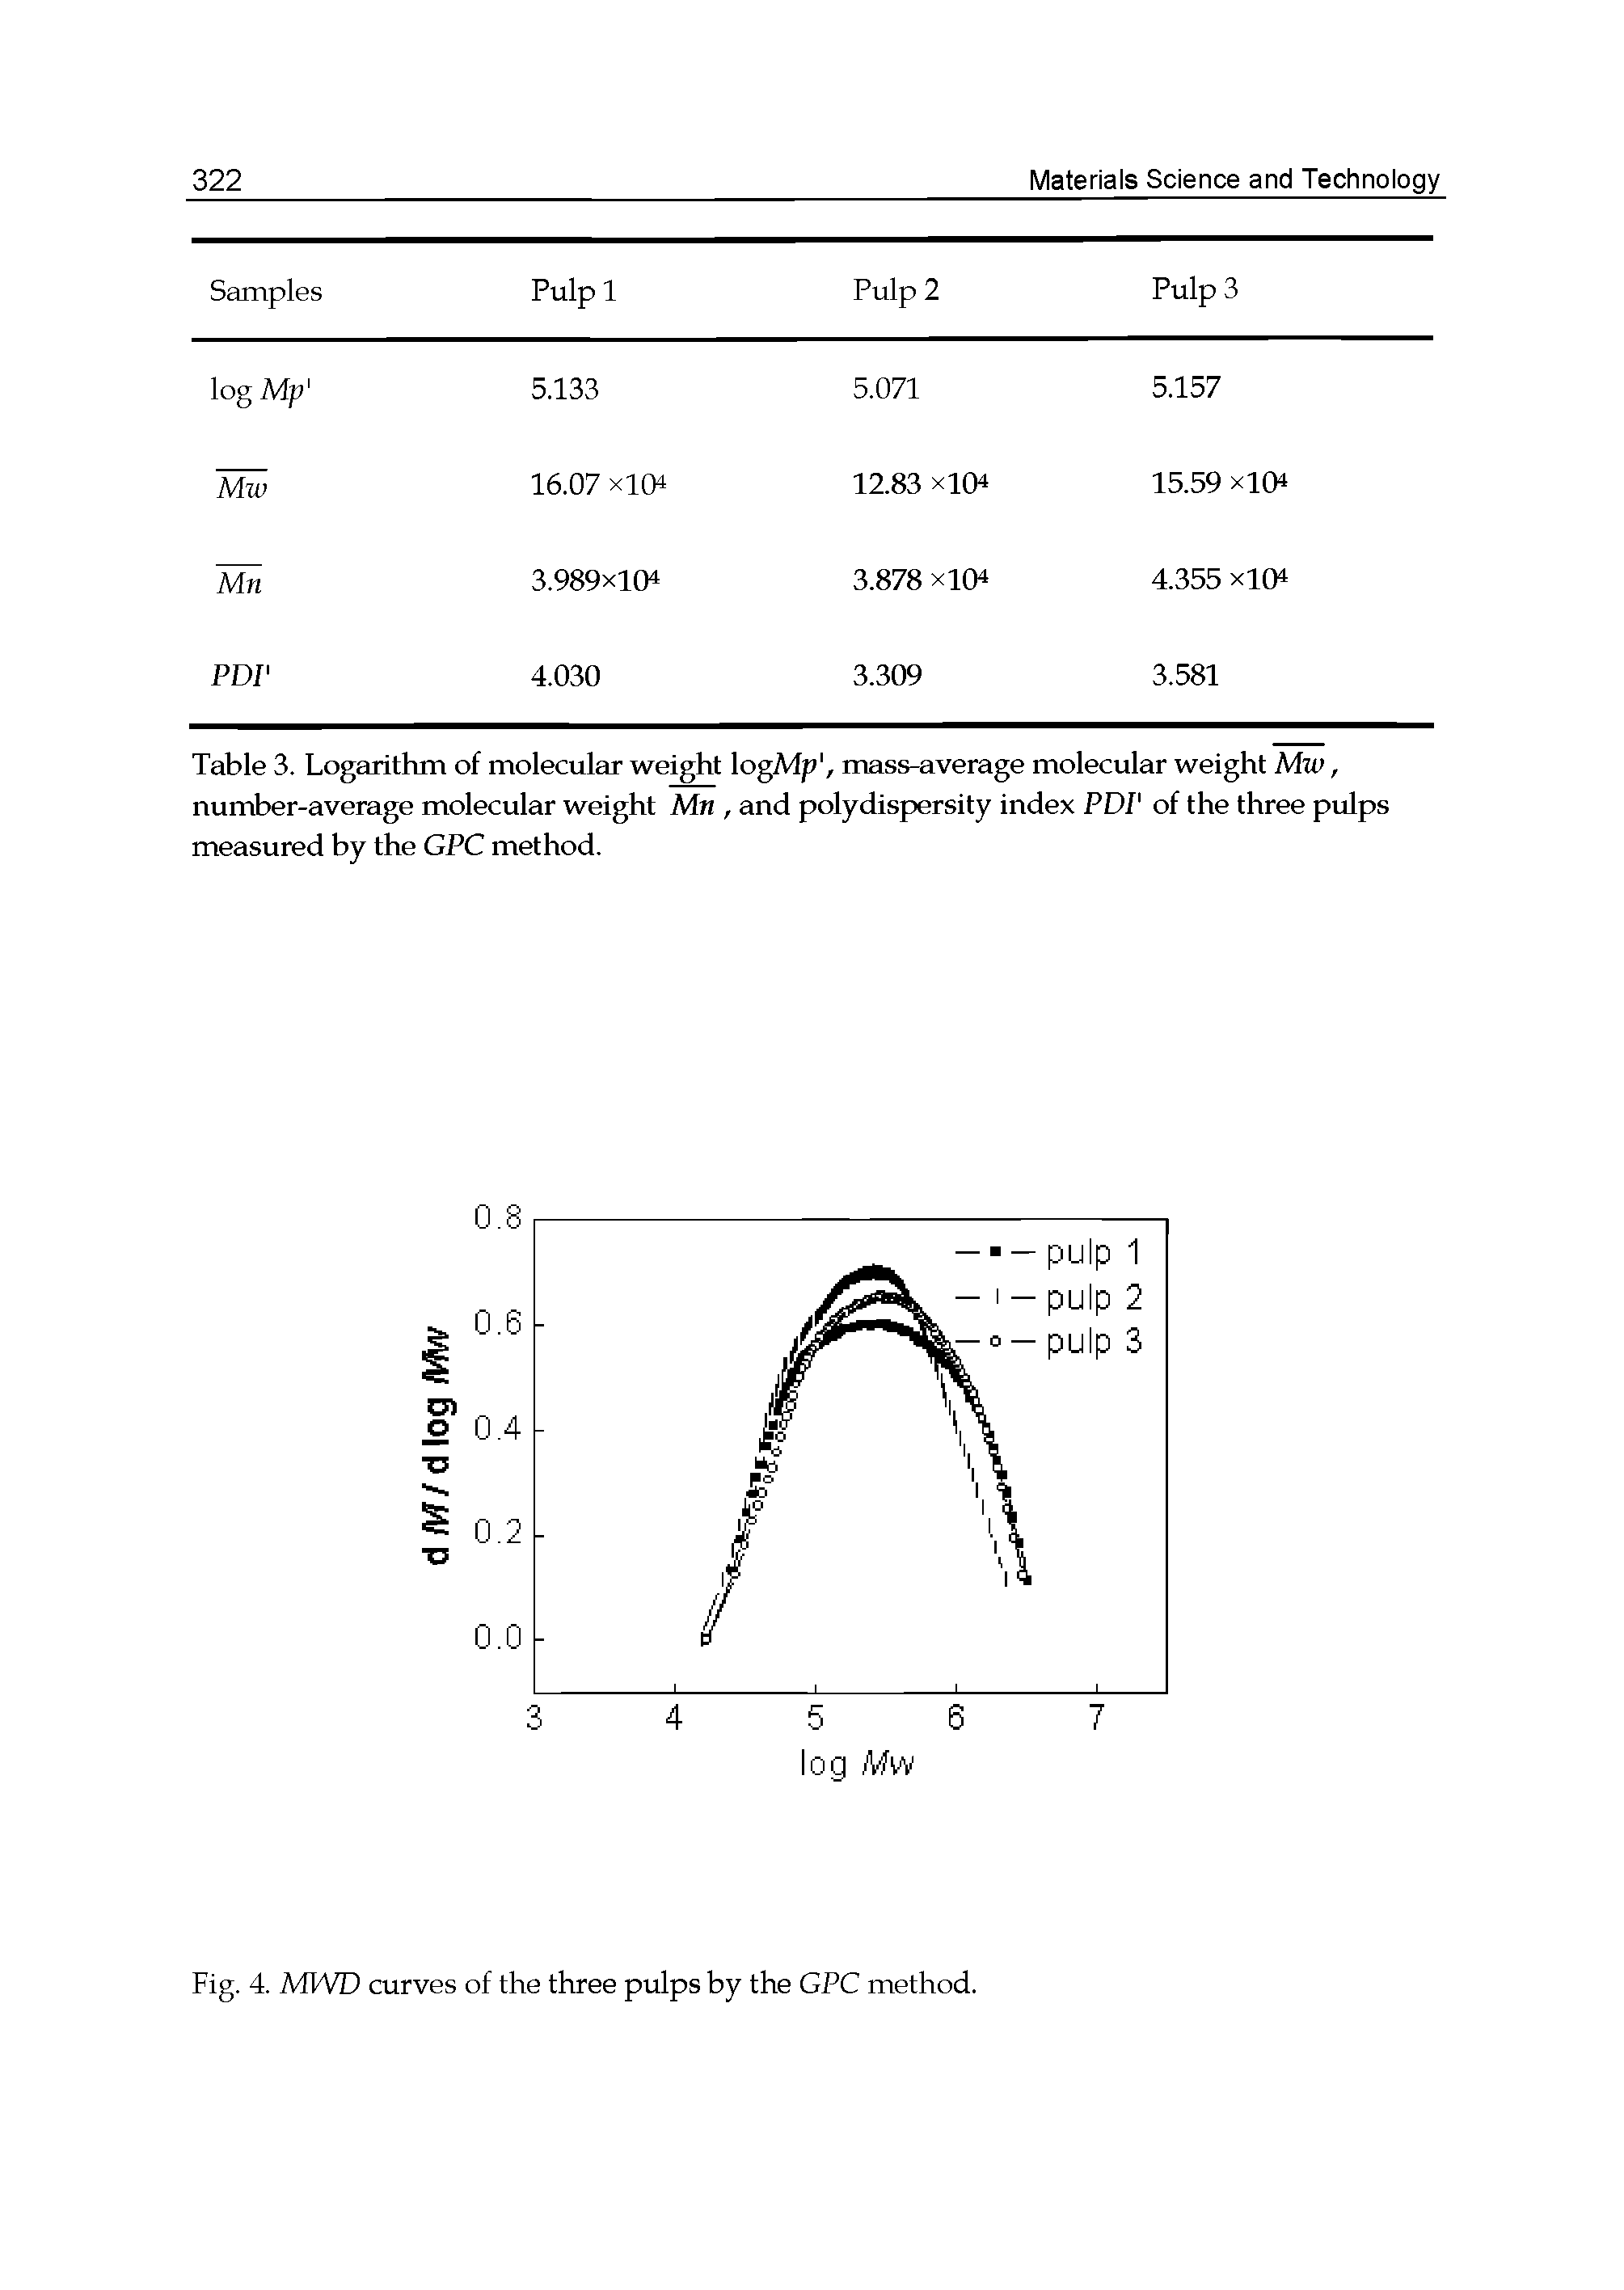 Table 3. Logarithm of molecular weight logMp, mass-average molecular weight Mw, number-average molecular weight Mn, and polydispersity index PDF of the three pulps measured by the GPC method.